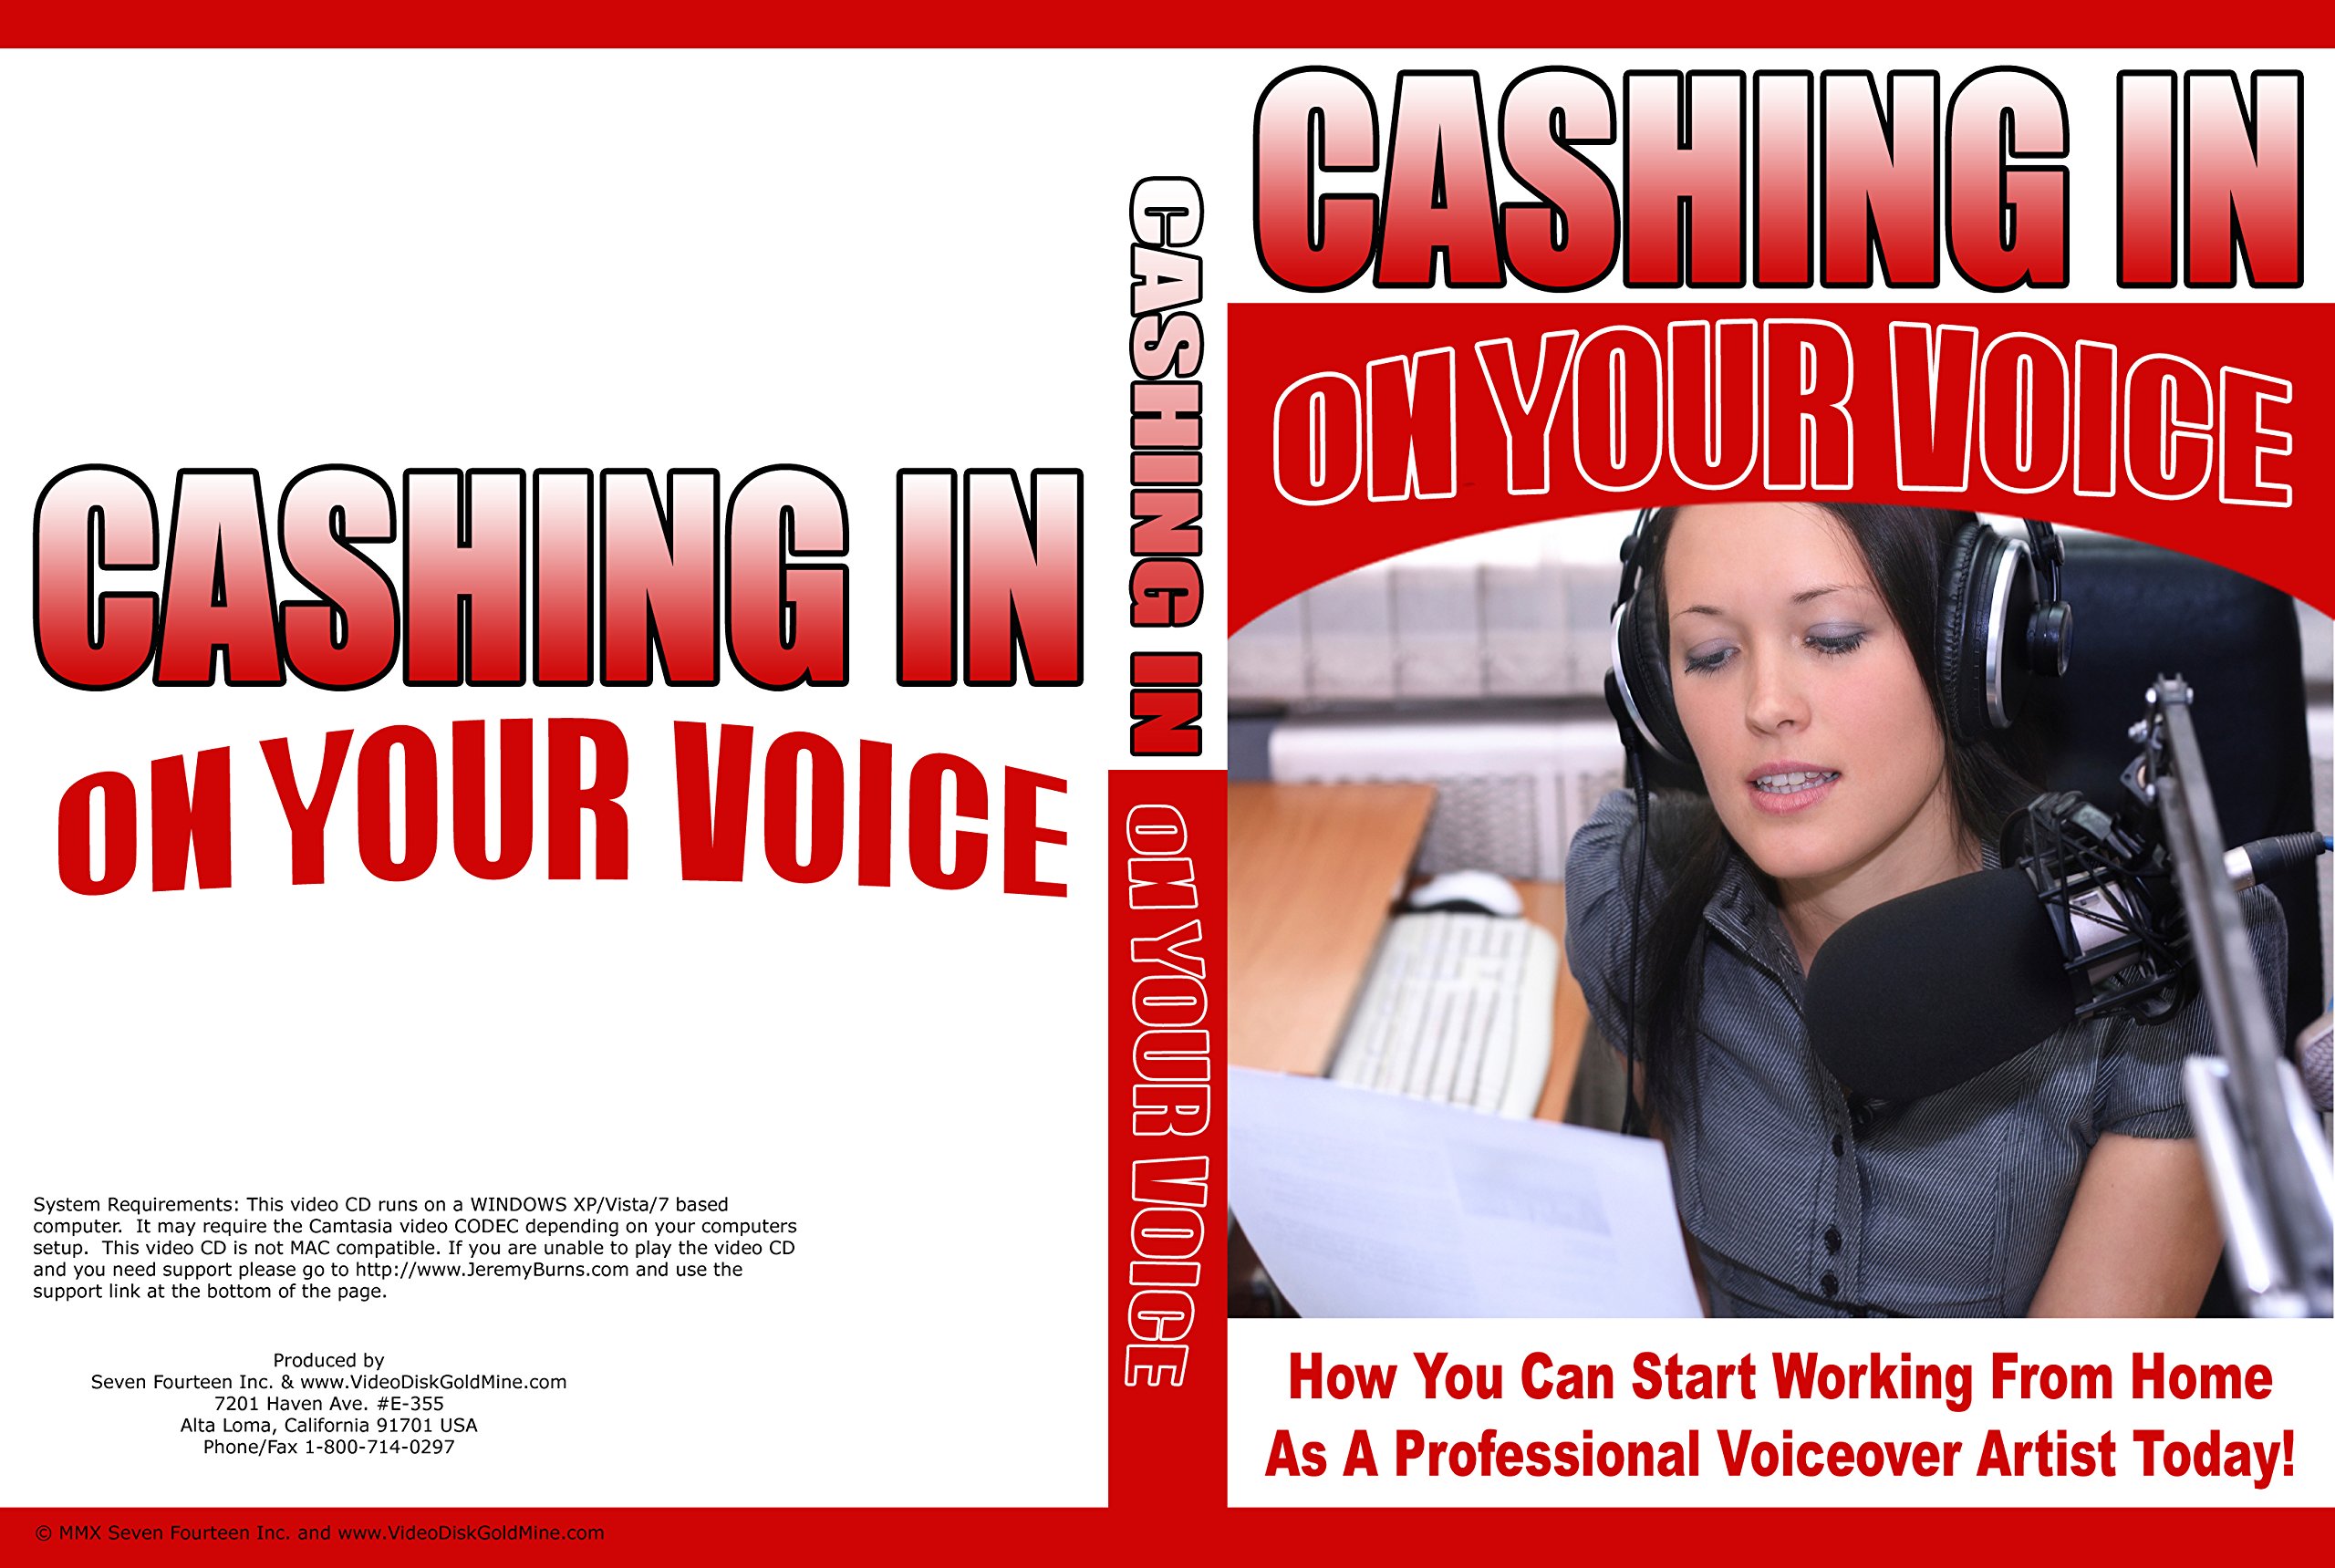 Cashing In On Your Voice